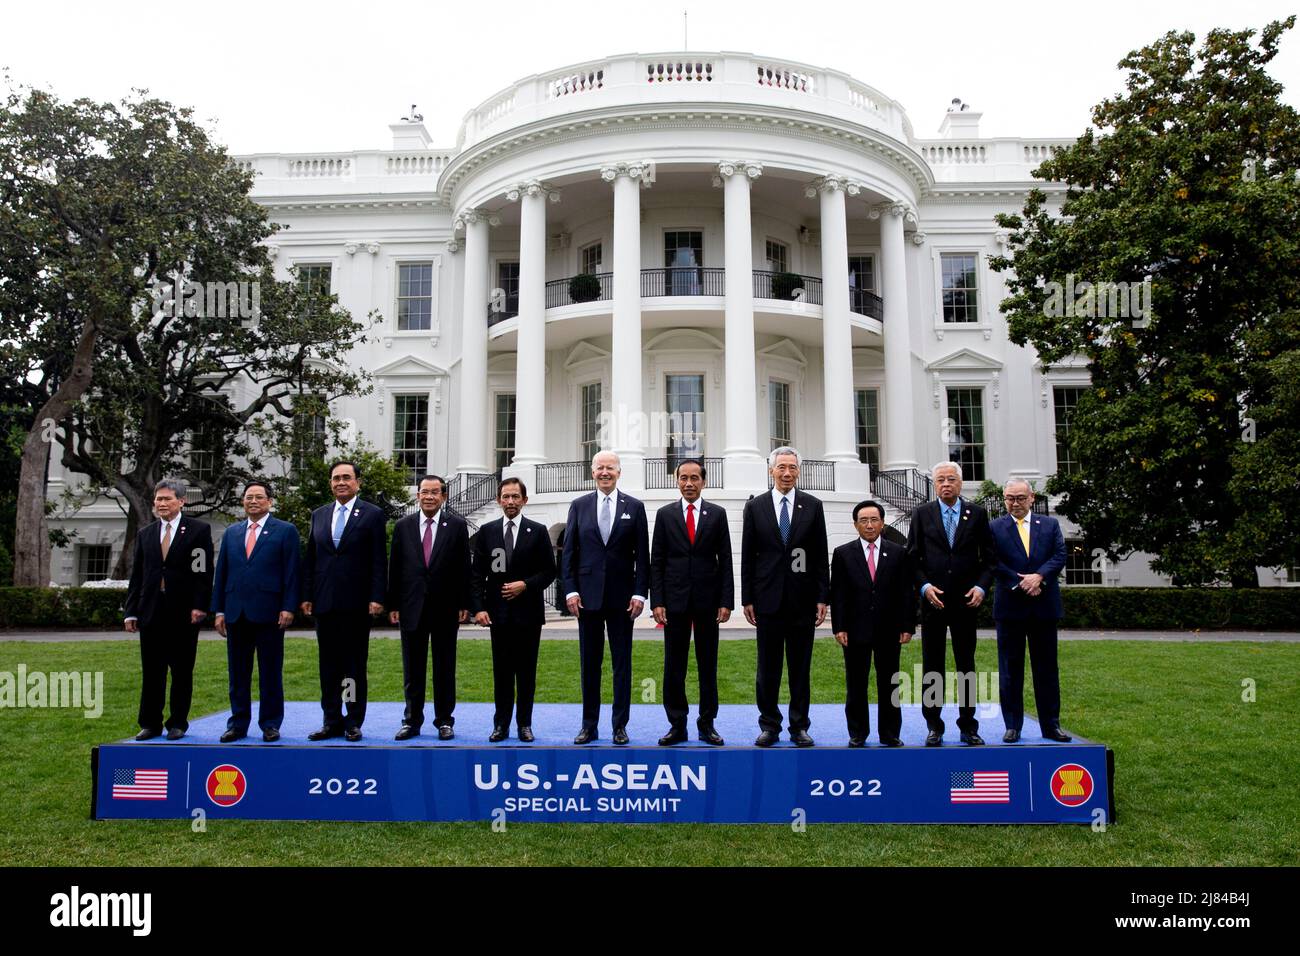 Washington, DC, USA, 12 May 2022. US President Joe Biden (C) poses with leaders of the US-ASEAN Special Summit during a family photo on the South Lawn of the White House in Washington, DC, USA, 12 March 2022. Also in this picture (L to R); Dato Lim Jock Hoi, Secretary-General of the Association for Southeast Asian Nations; Prime Minister of Vietnam Pham Minh Chinh; Prime Minister of Thailand Prayut Chan-o-cha; Prime Minister of Cambodia Hun Sen; Sultan Haji Hassanal Bolkiah of Brunei; President of Indonesia Joko Widodo; Prime Minister of the Republic of Singapore Lee Hsien Loong; Prime Ministe Stock Photo